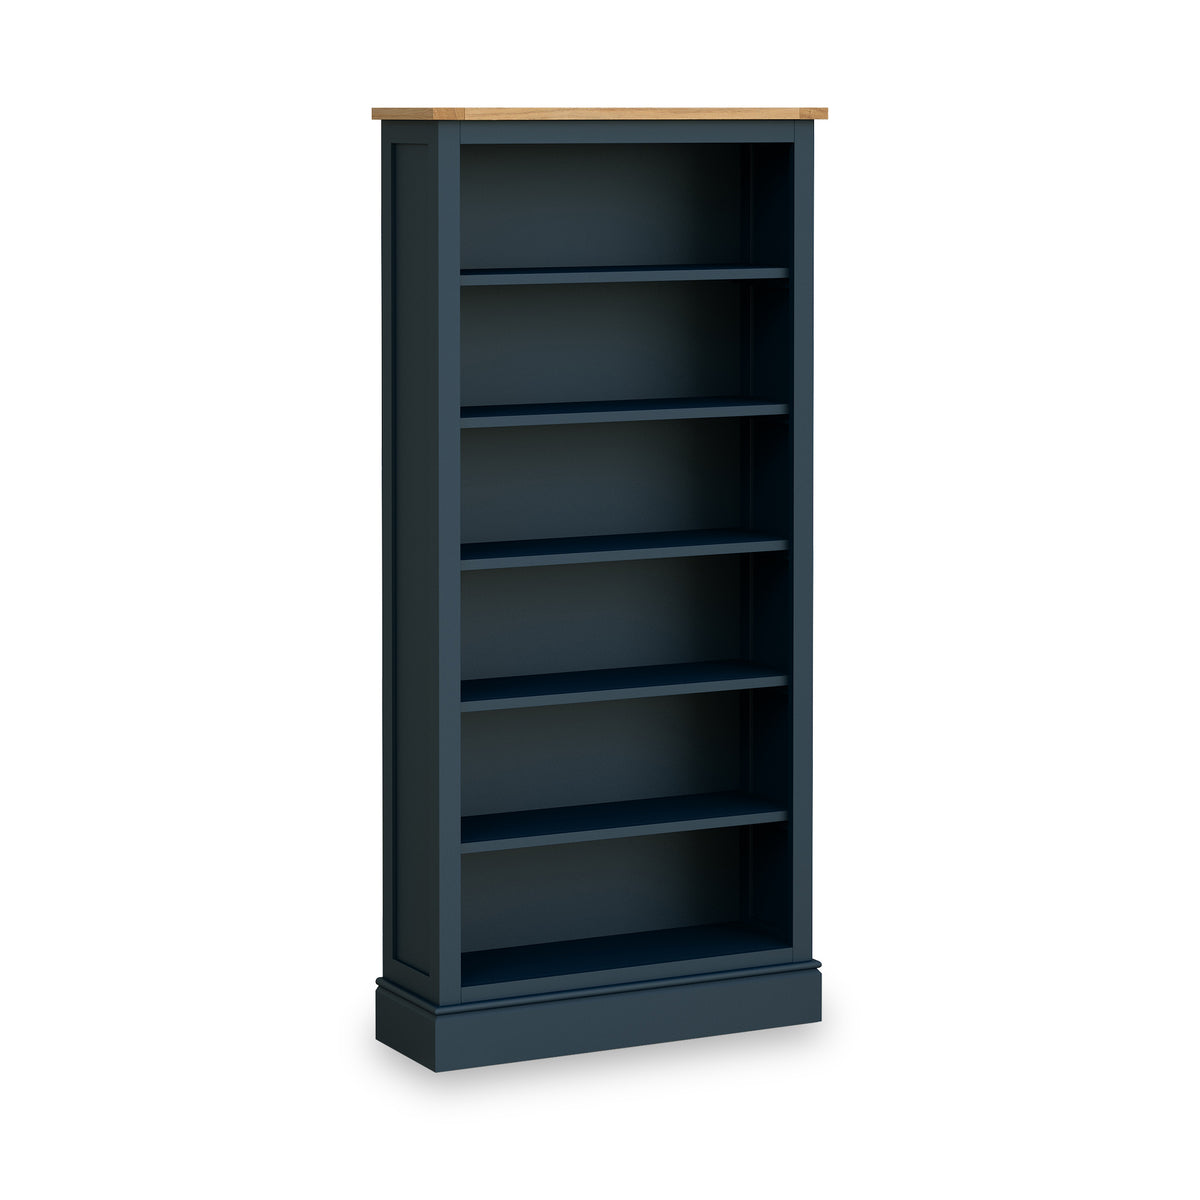 Bude Navy Blue Large Bookcase with Painted Shelves from Roseland Furniture